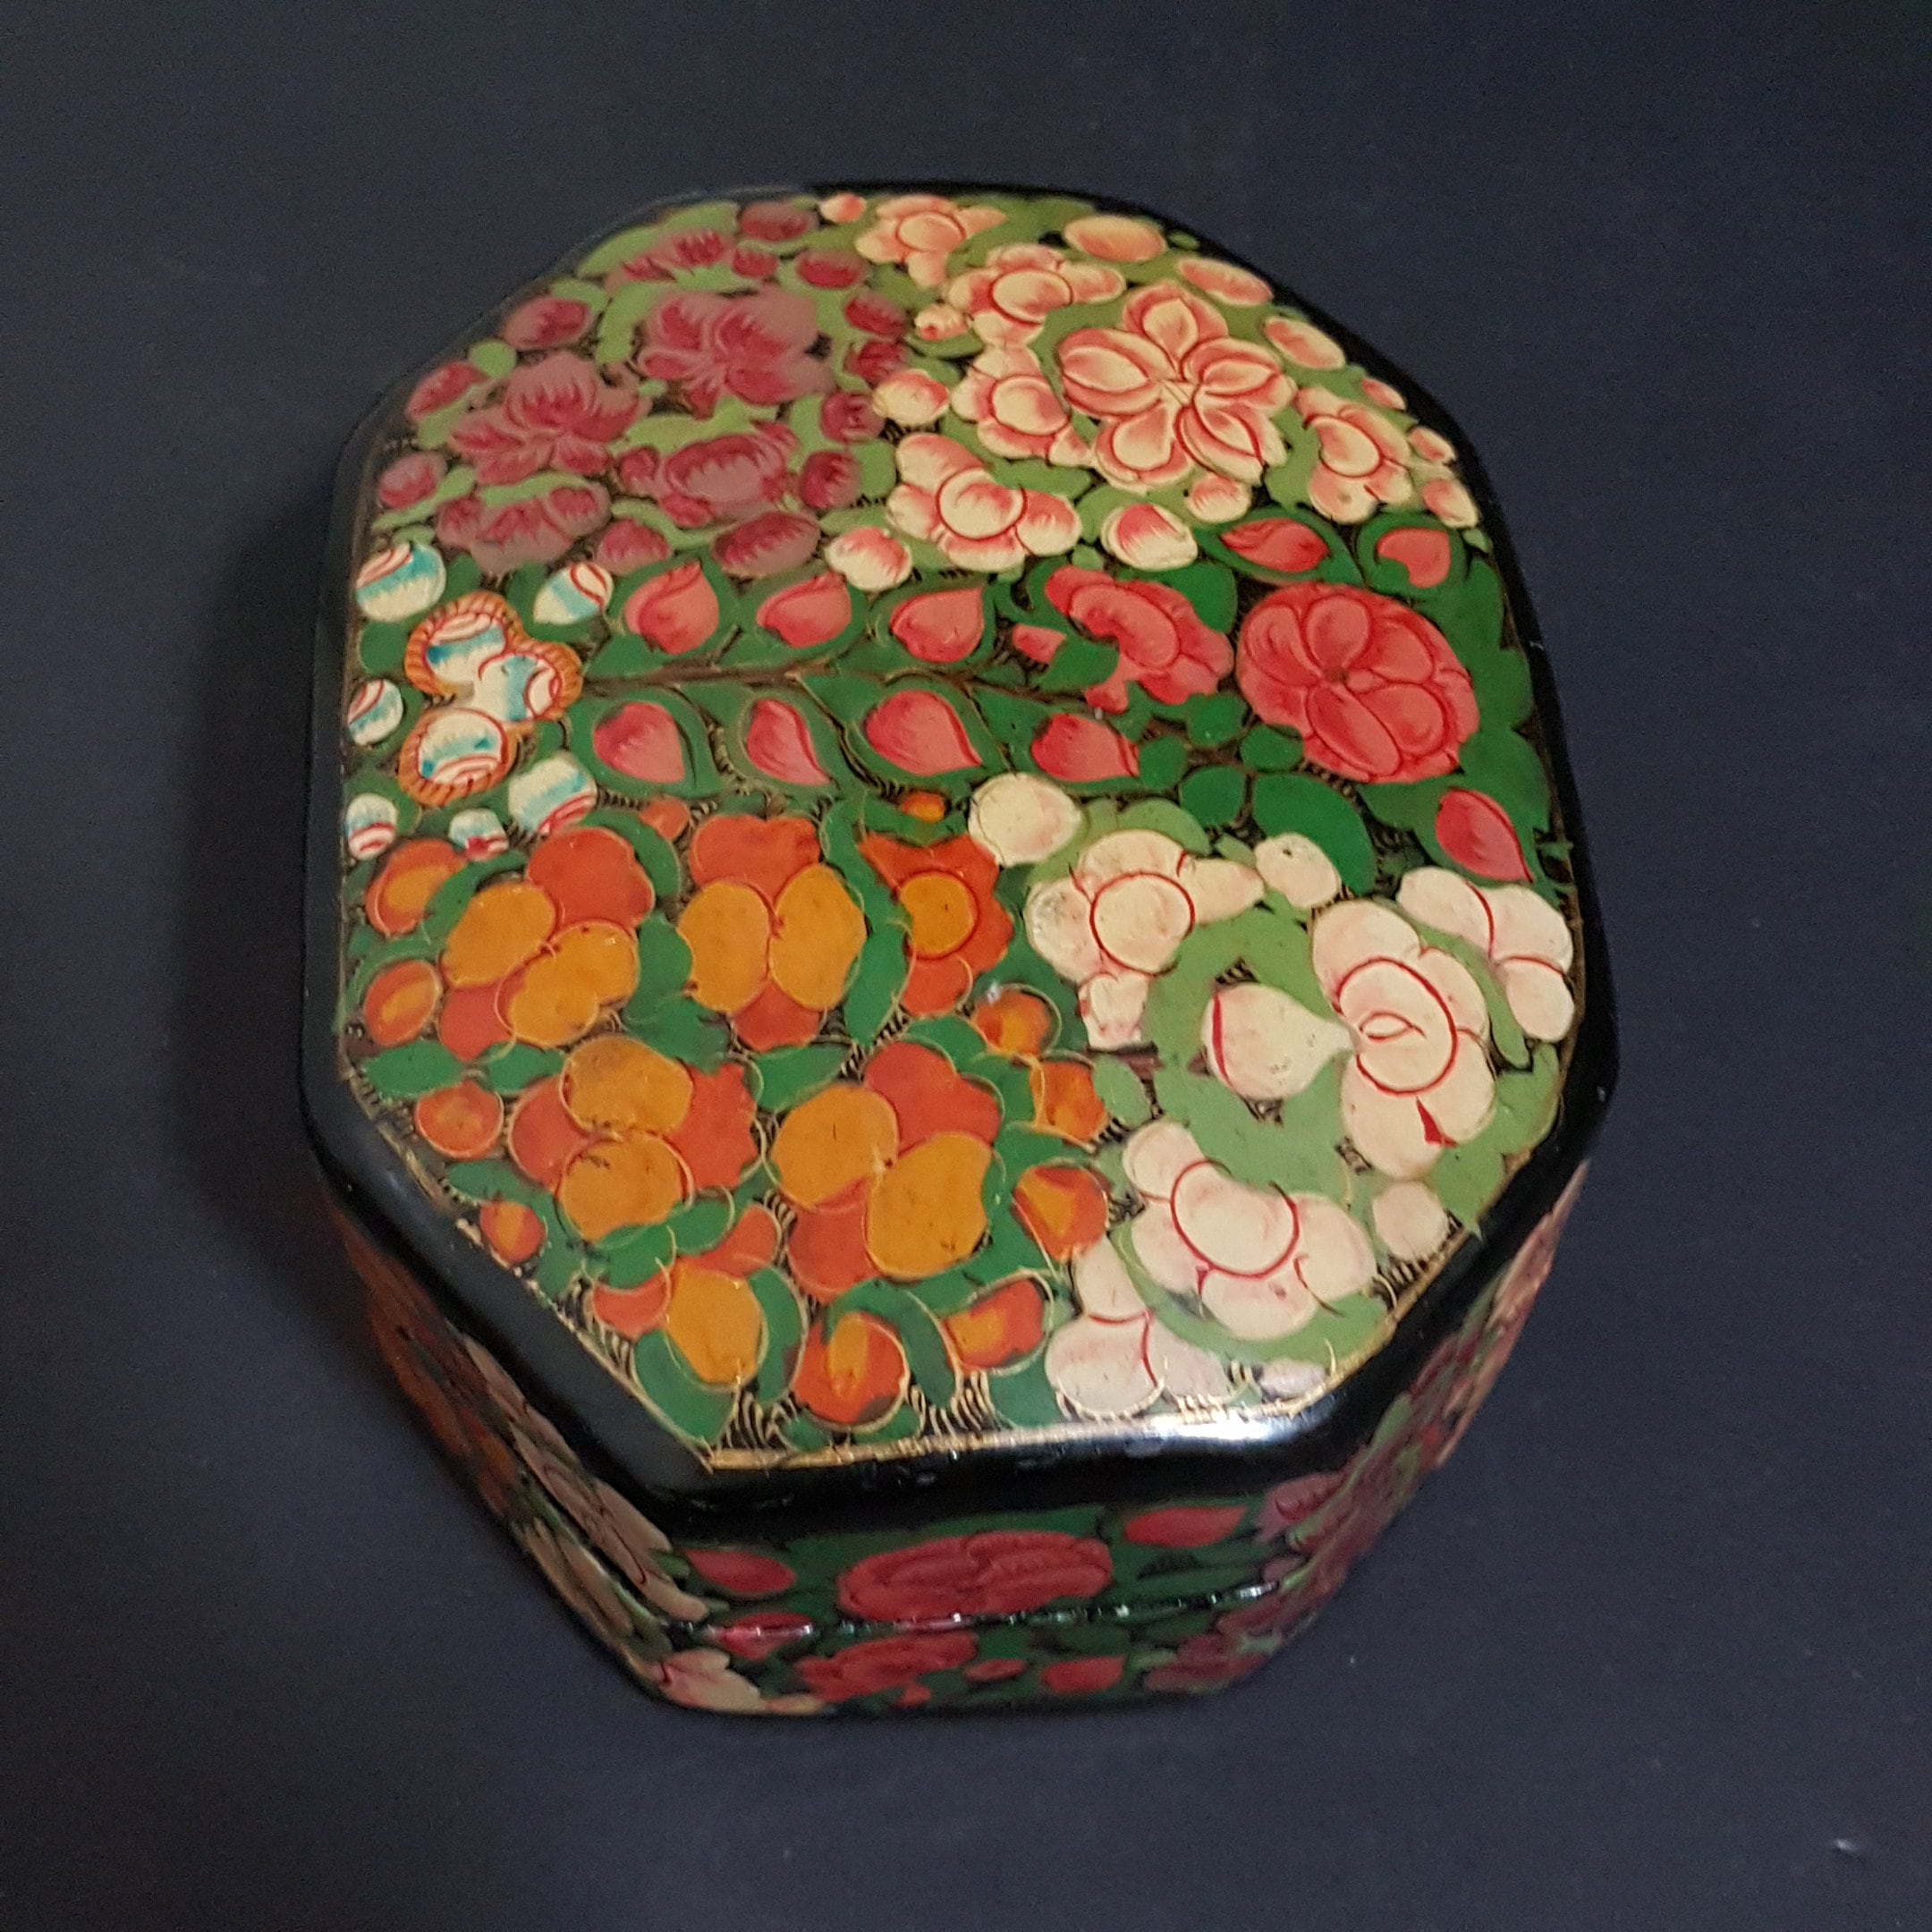 1970s Vintage Kashmir Hand Crafted Paper Mache' Boxes, Set of 2